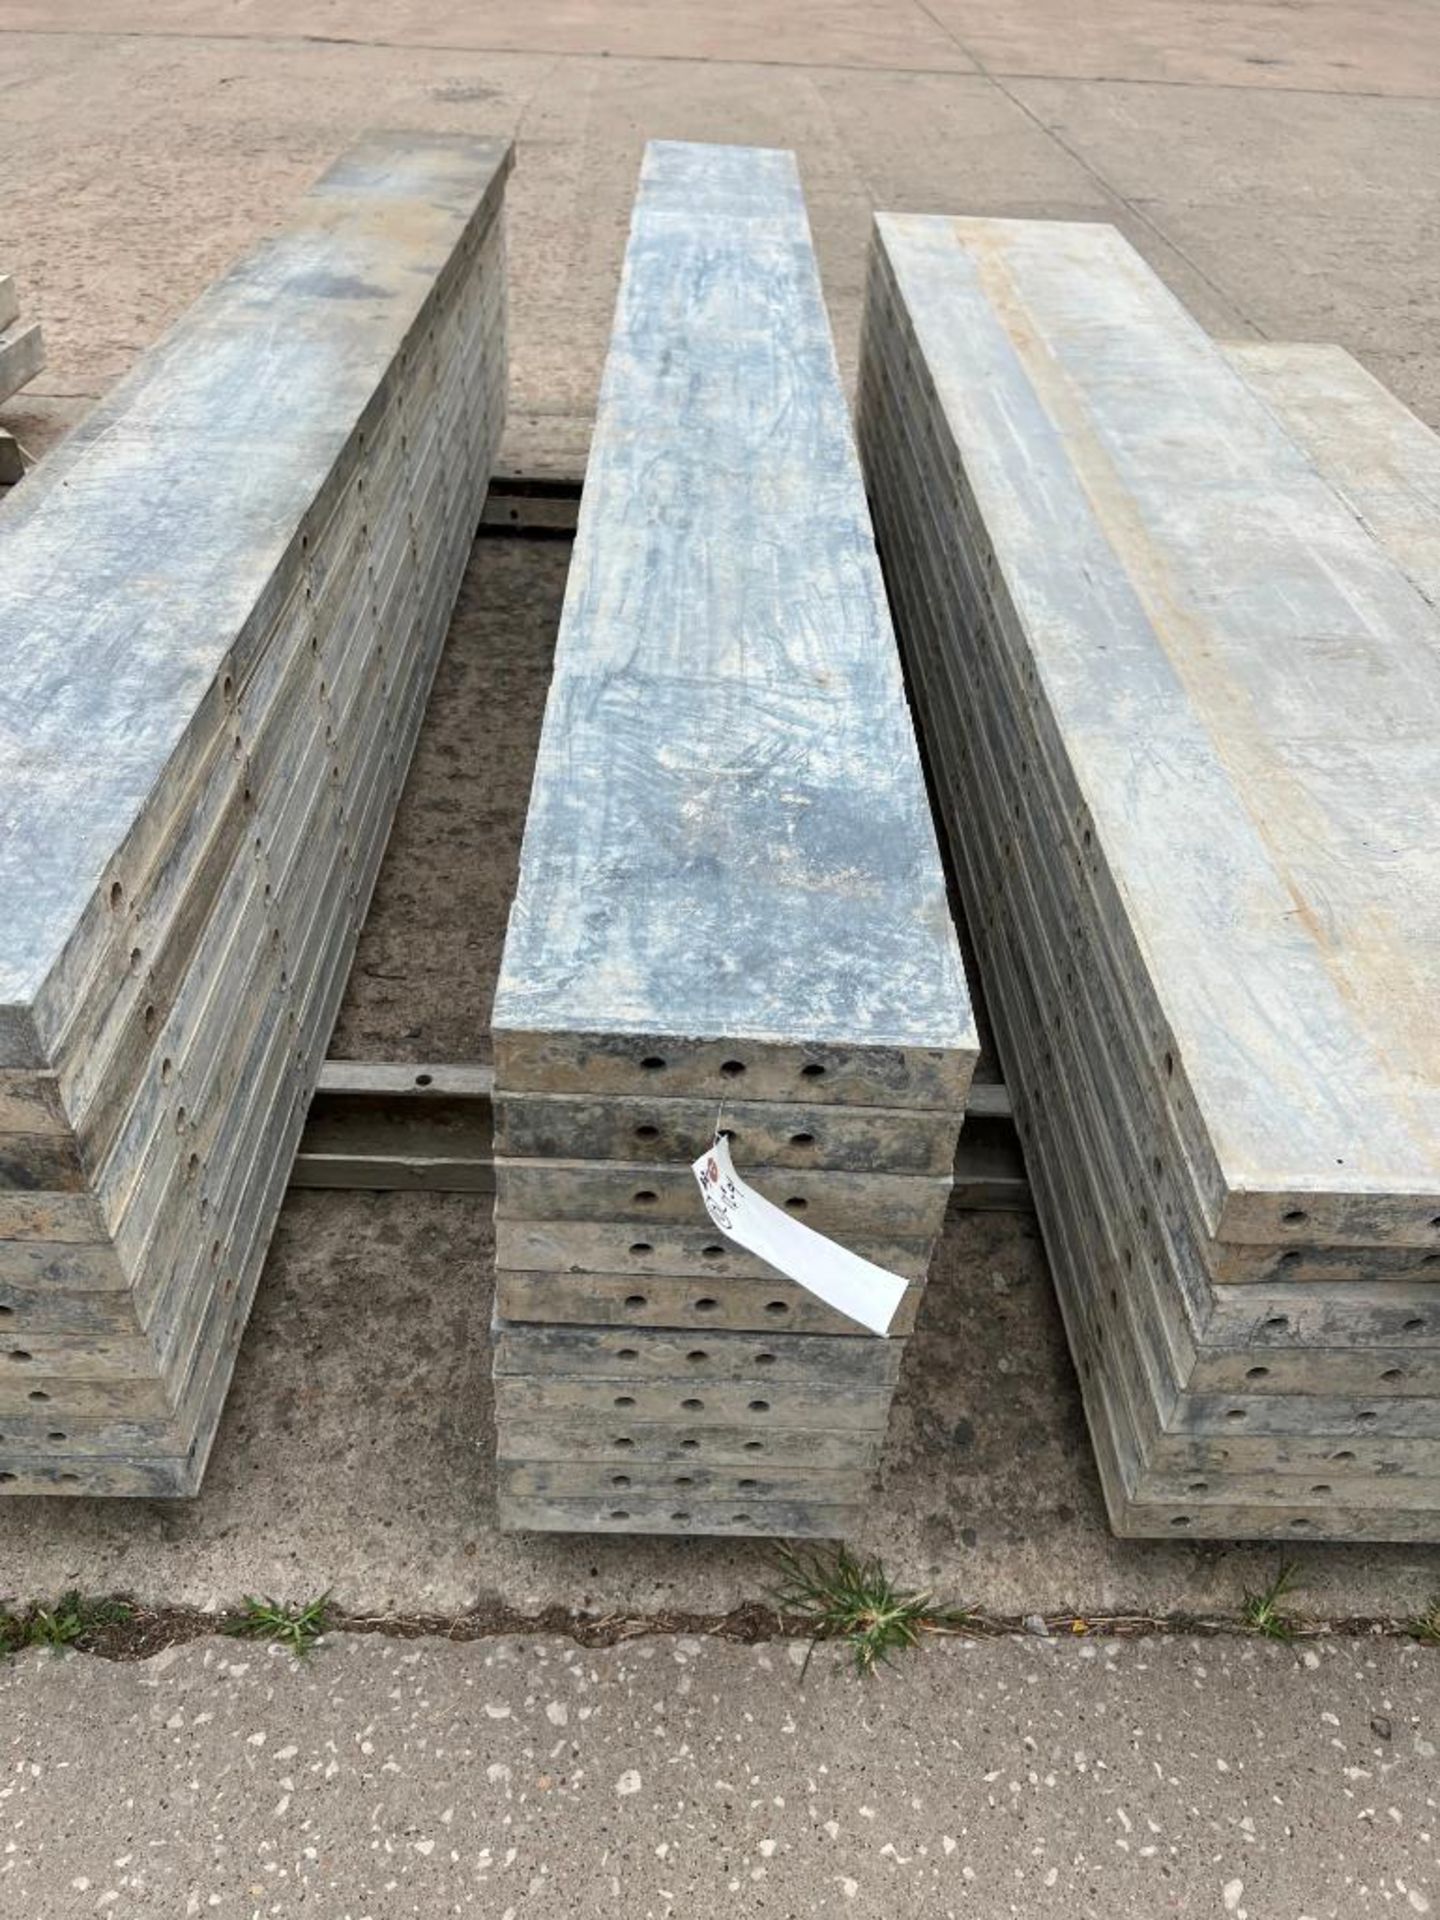 (10) 12" x 9' Symons Aluminum Concrete Forms. 6-12 Hole Pattern. Located in Mt. Pleasant, IA